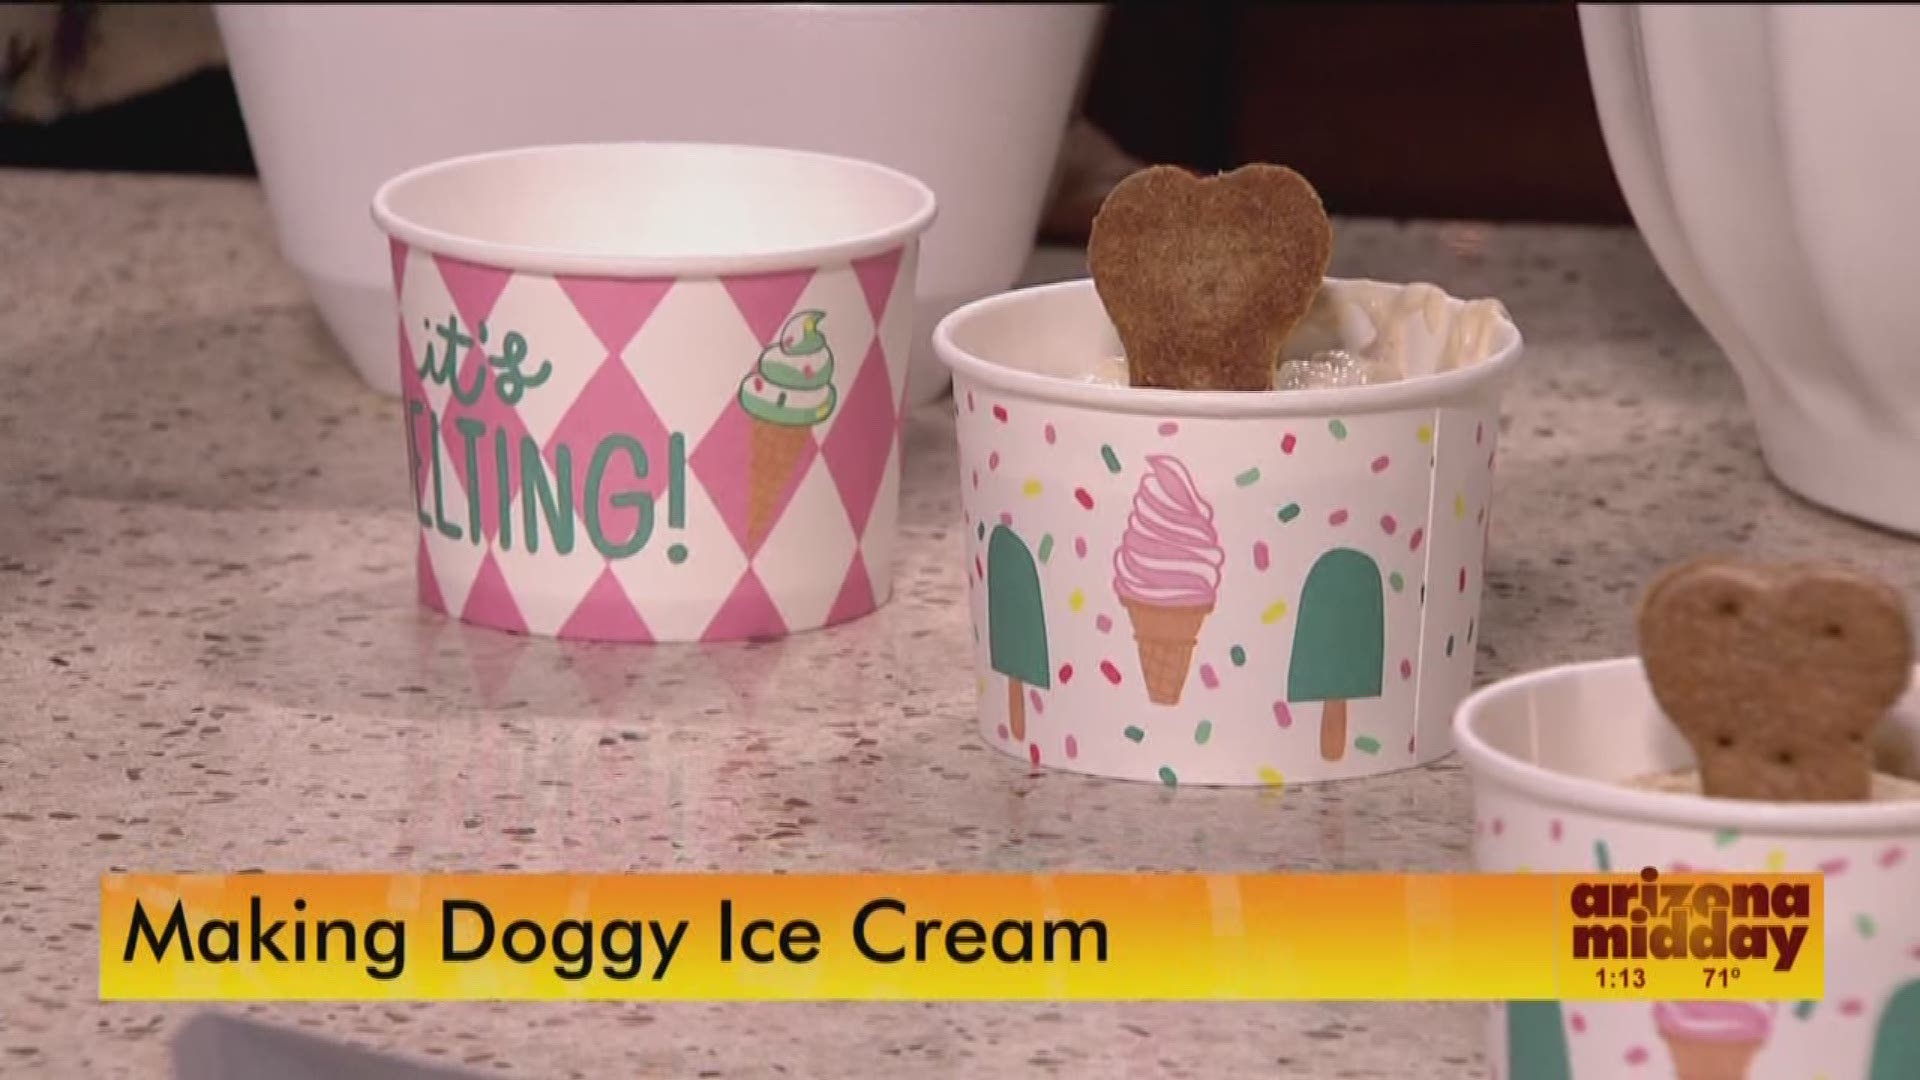 Check out this fun recipe to for doggy ice cream that your four-legged friends are sure to love during the hot summer months.